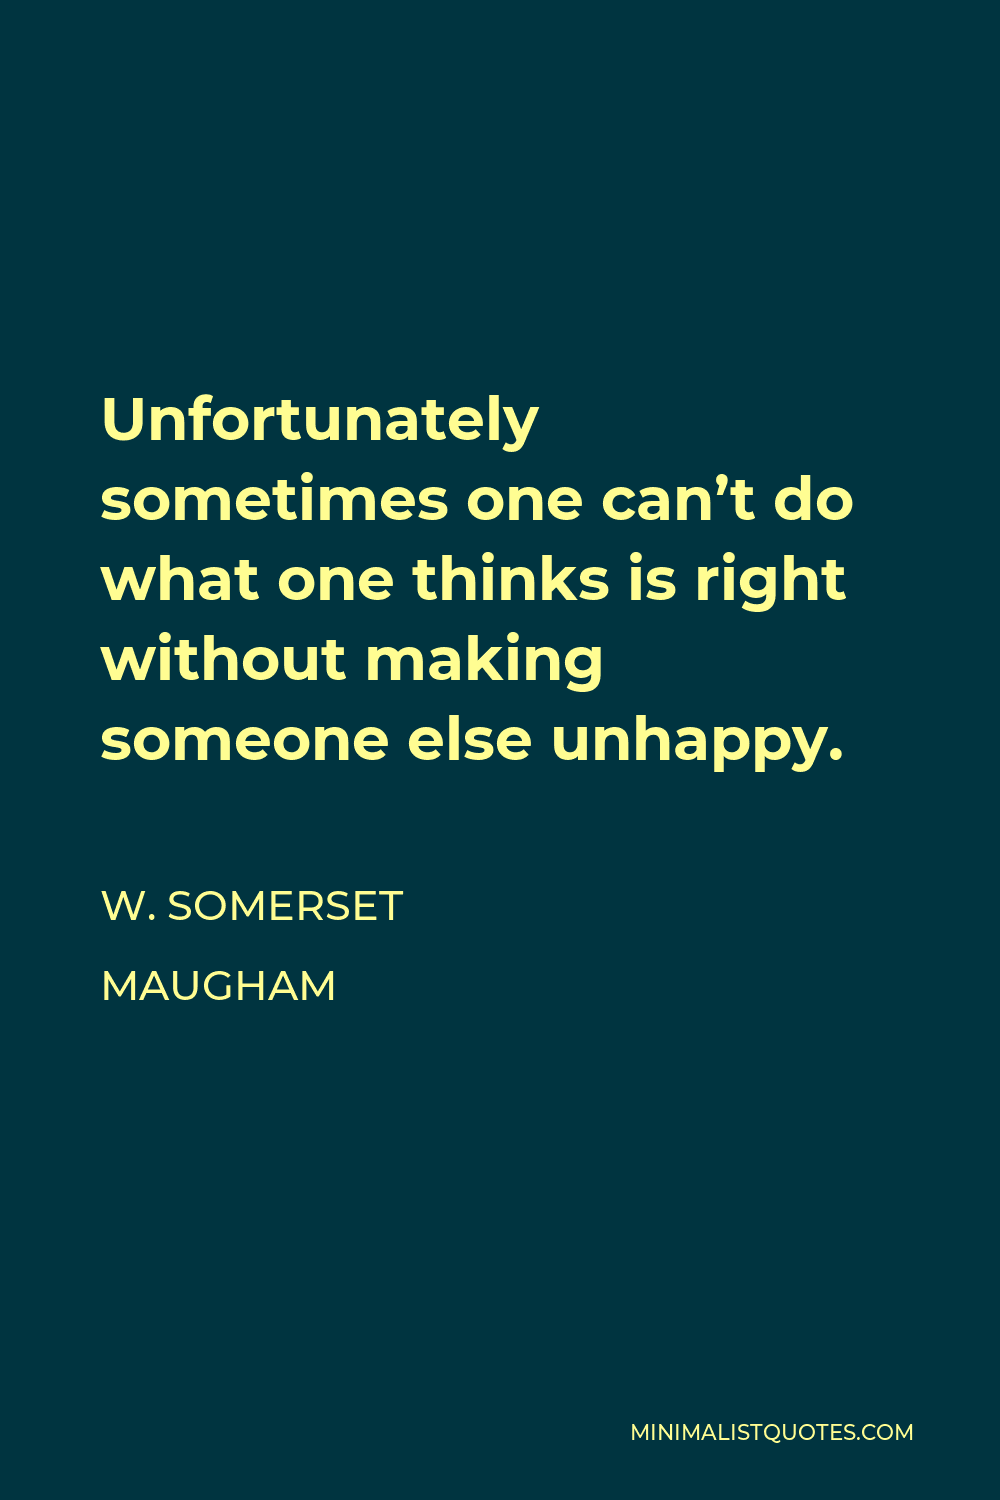 W. Somerset Maugham Quote - Unfortunately sometimes one can’t do what one thinks is right without making someone else unhappy.